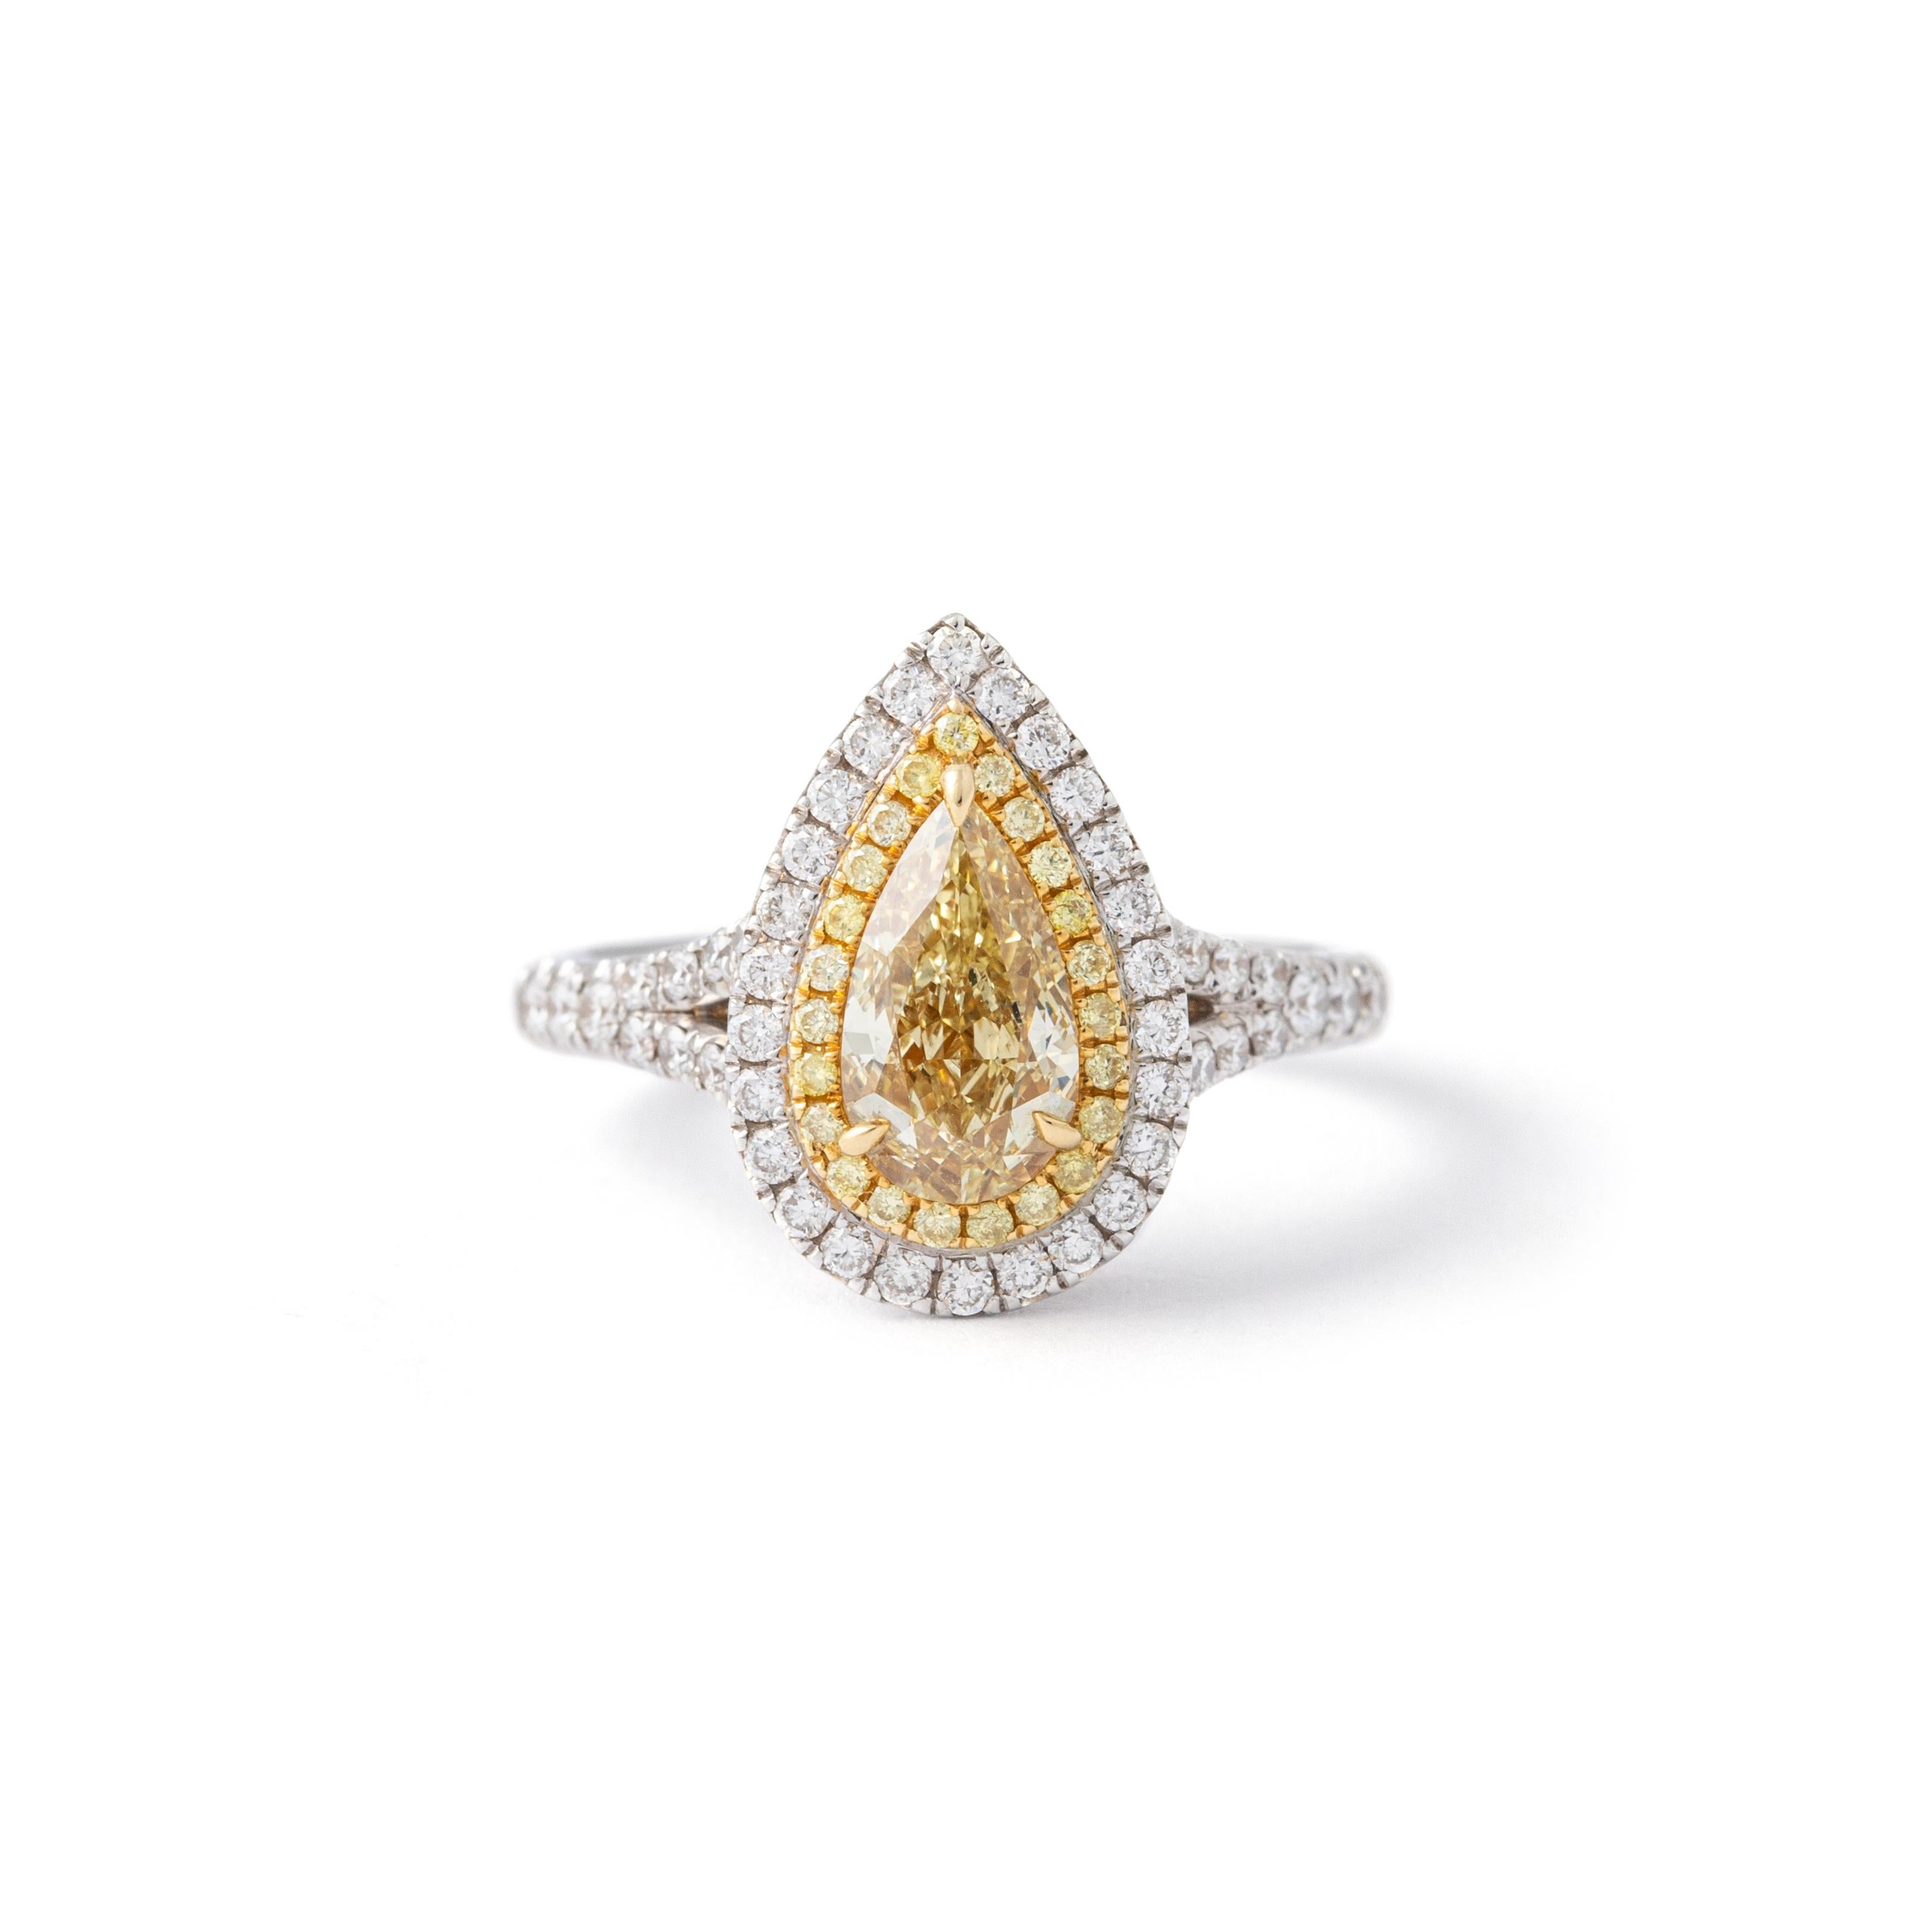 Fancy Light Brownish Yellow Diamond White Gold 18K Ring. 

GIA certificate:
VS1, natural, fancy light brownish yellow, 1.17 carats.
diamonds round natural 70 pieces, 0.47 carats, VS-F.

Ring Size: 51.5 / 5.75 US. 
Weight: 4.89 grams.